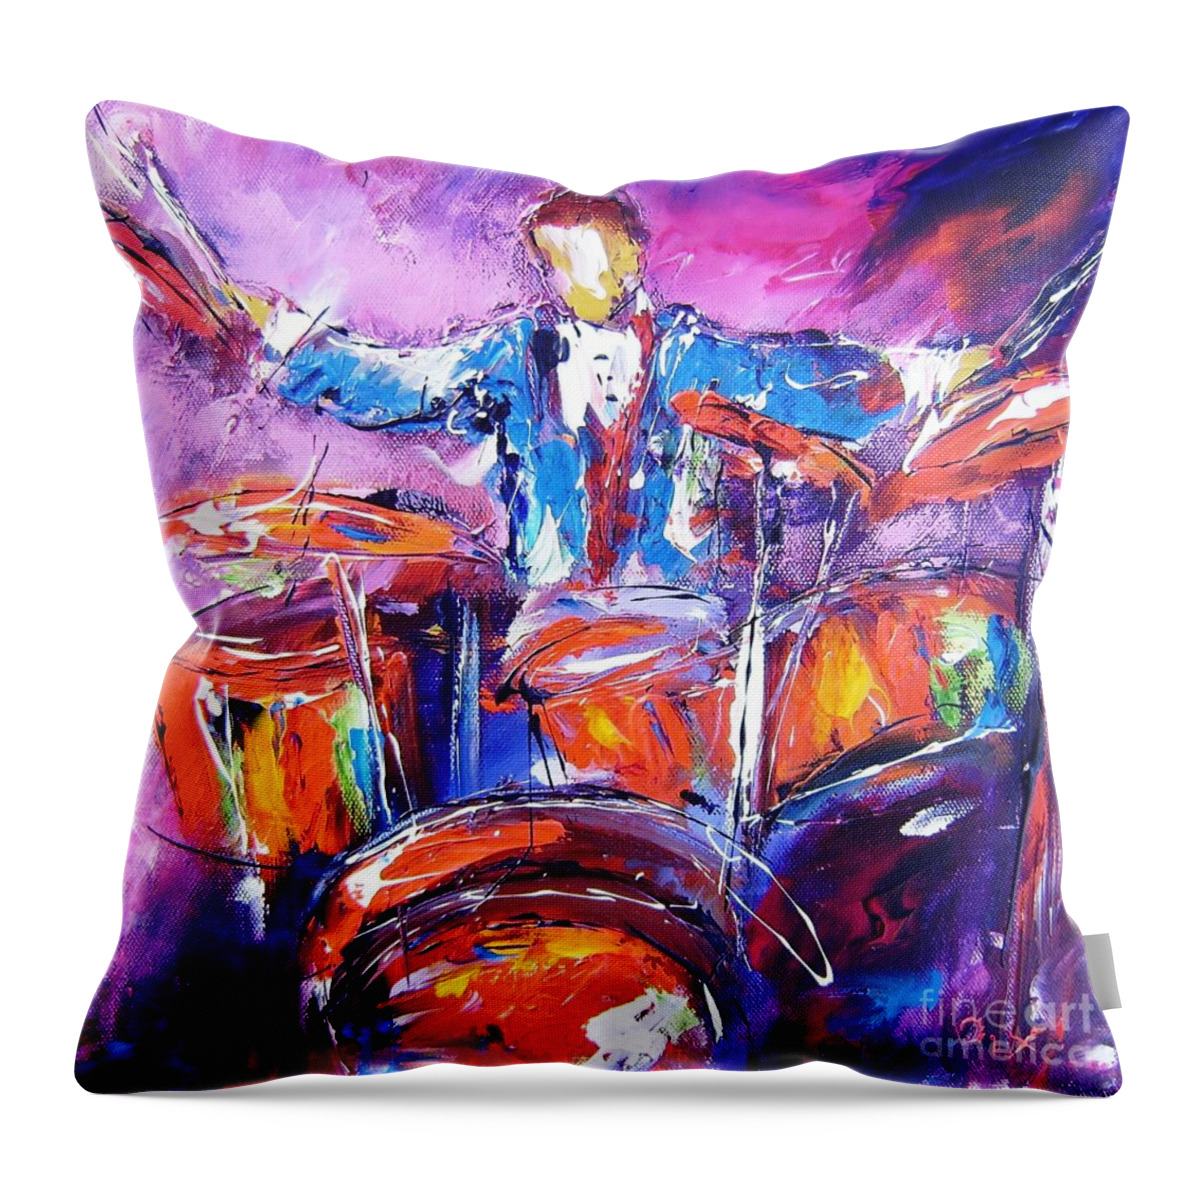 Rock Drummer Throw Pillow featuring the painting Rock drummer painting available as an art print by Mary Cahalan Lee - aka PIXI